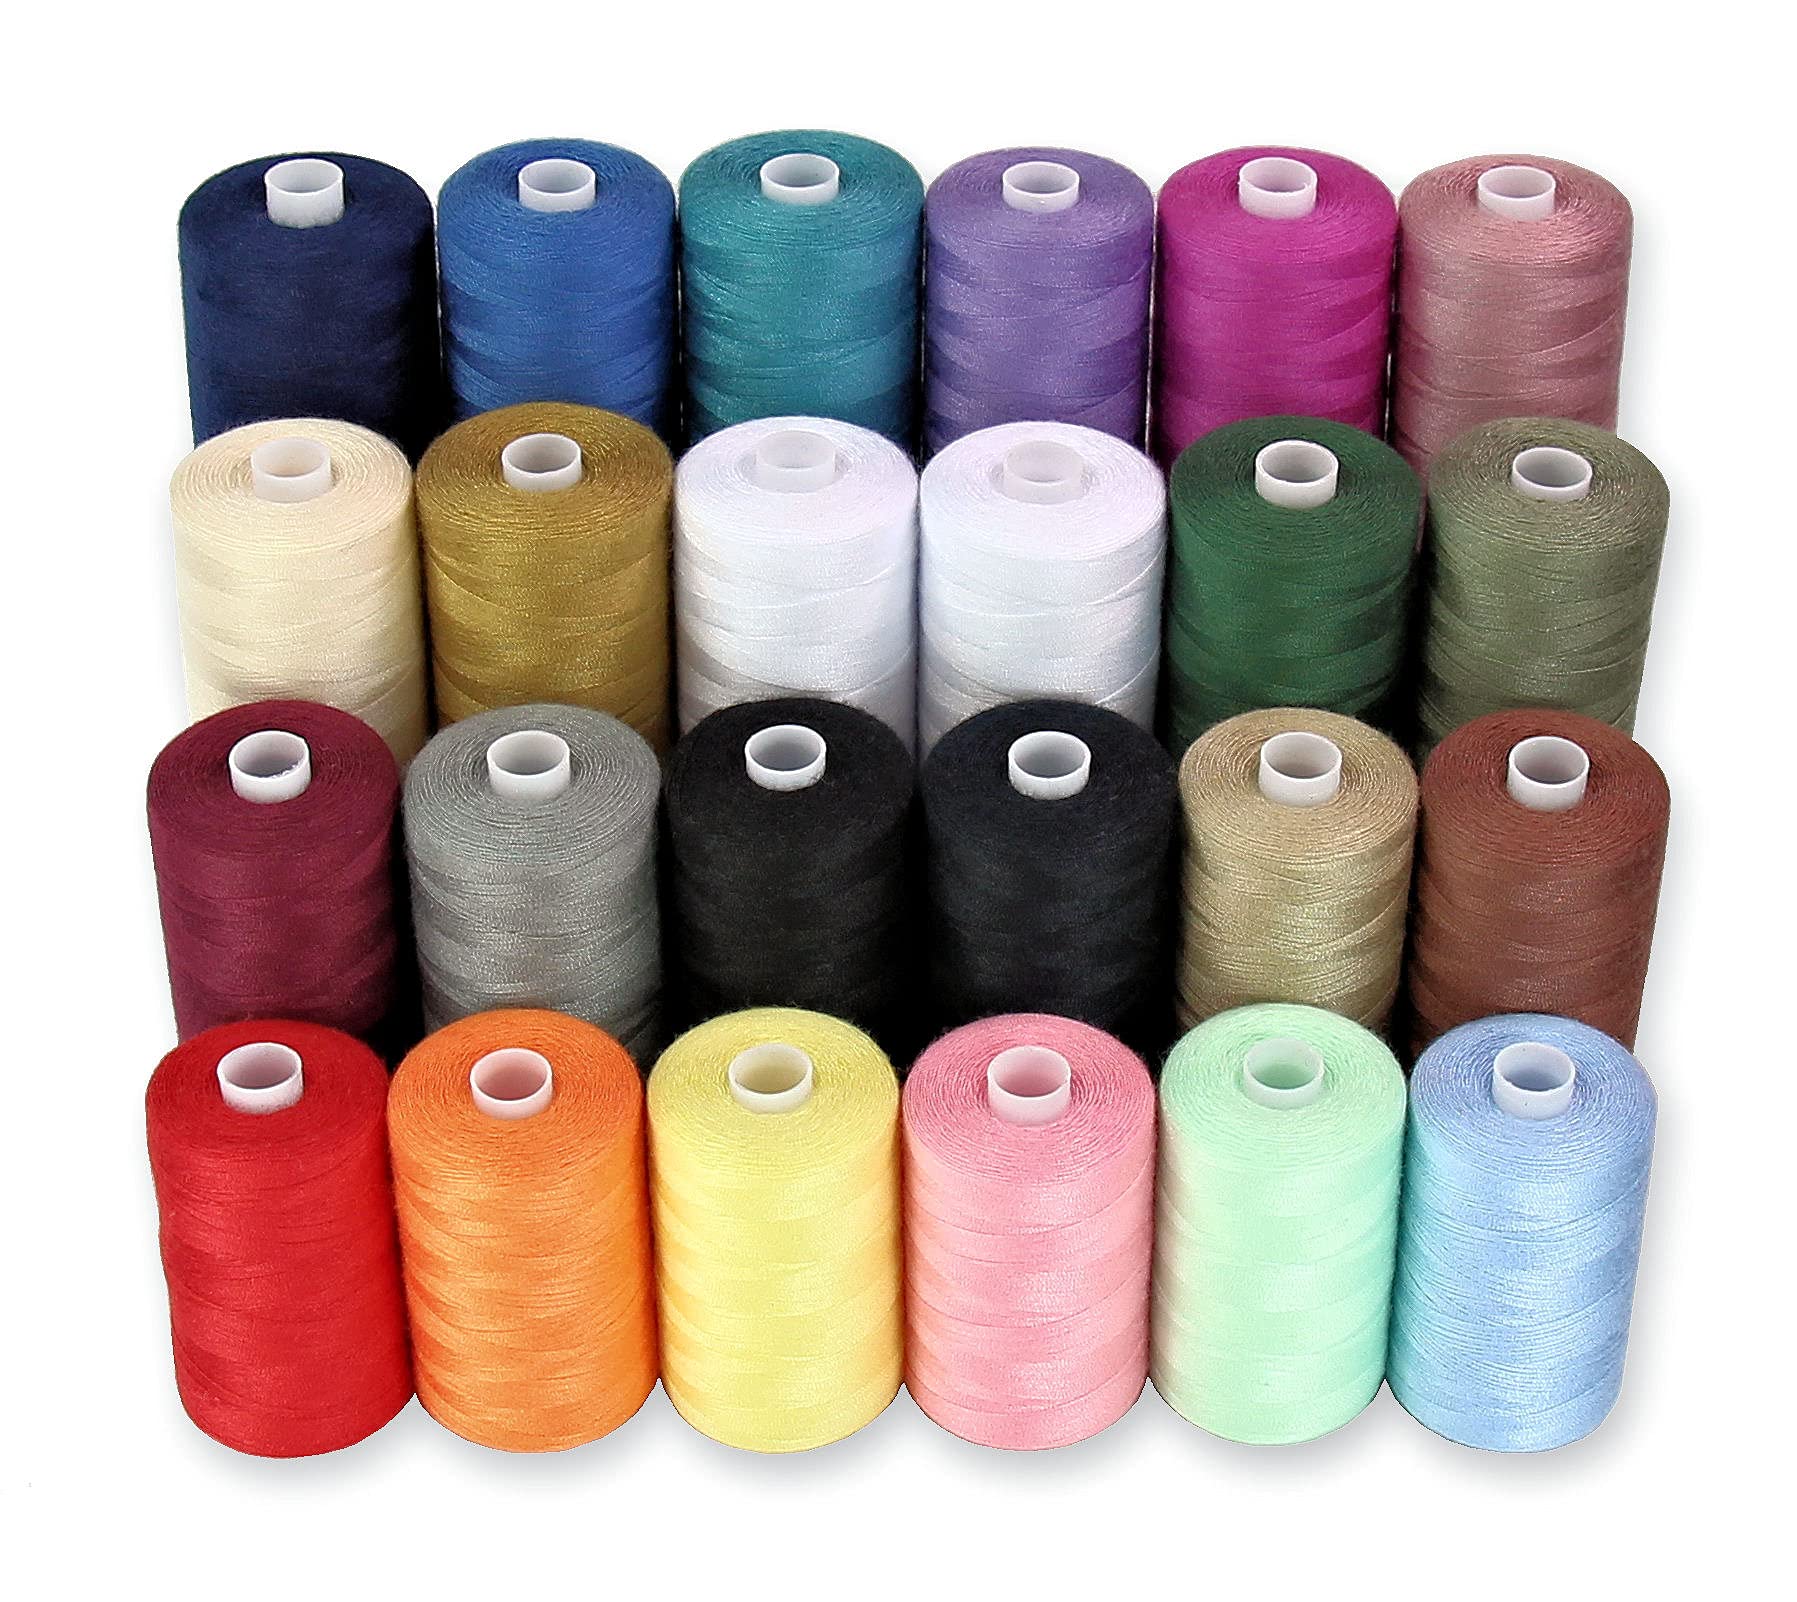 Sewing Thread - 24 Polyester Threads for Hand Stitching Quilting & Sewing  Machine - Set of 1000 yds Per Spool - 20 Colors Plus 2 x White & 2 x Black  Classic